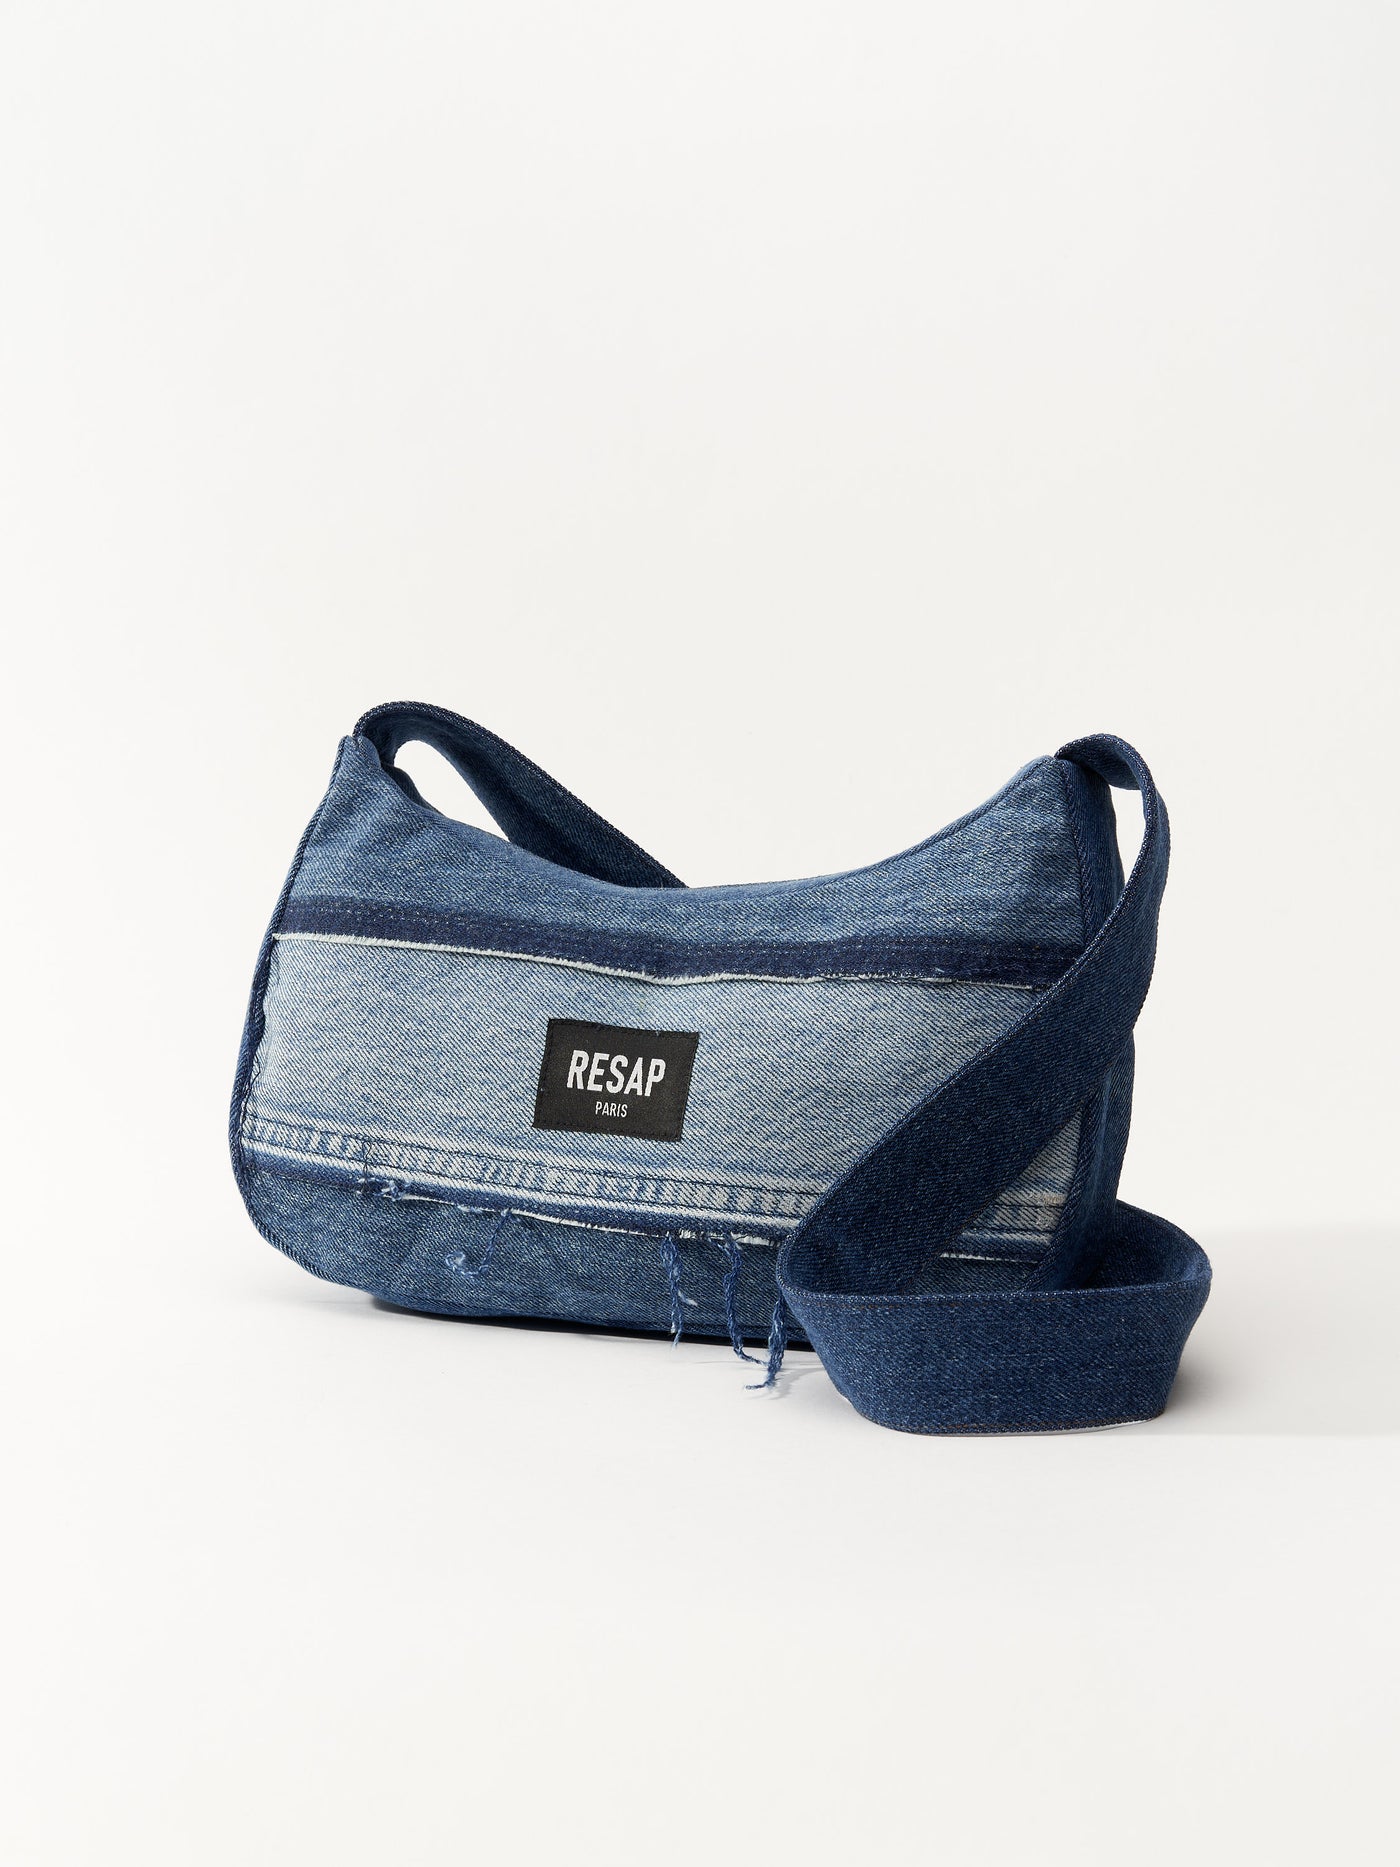 KIT COUTURE UPCYCLING : LE SAC BAGUETTE